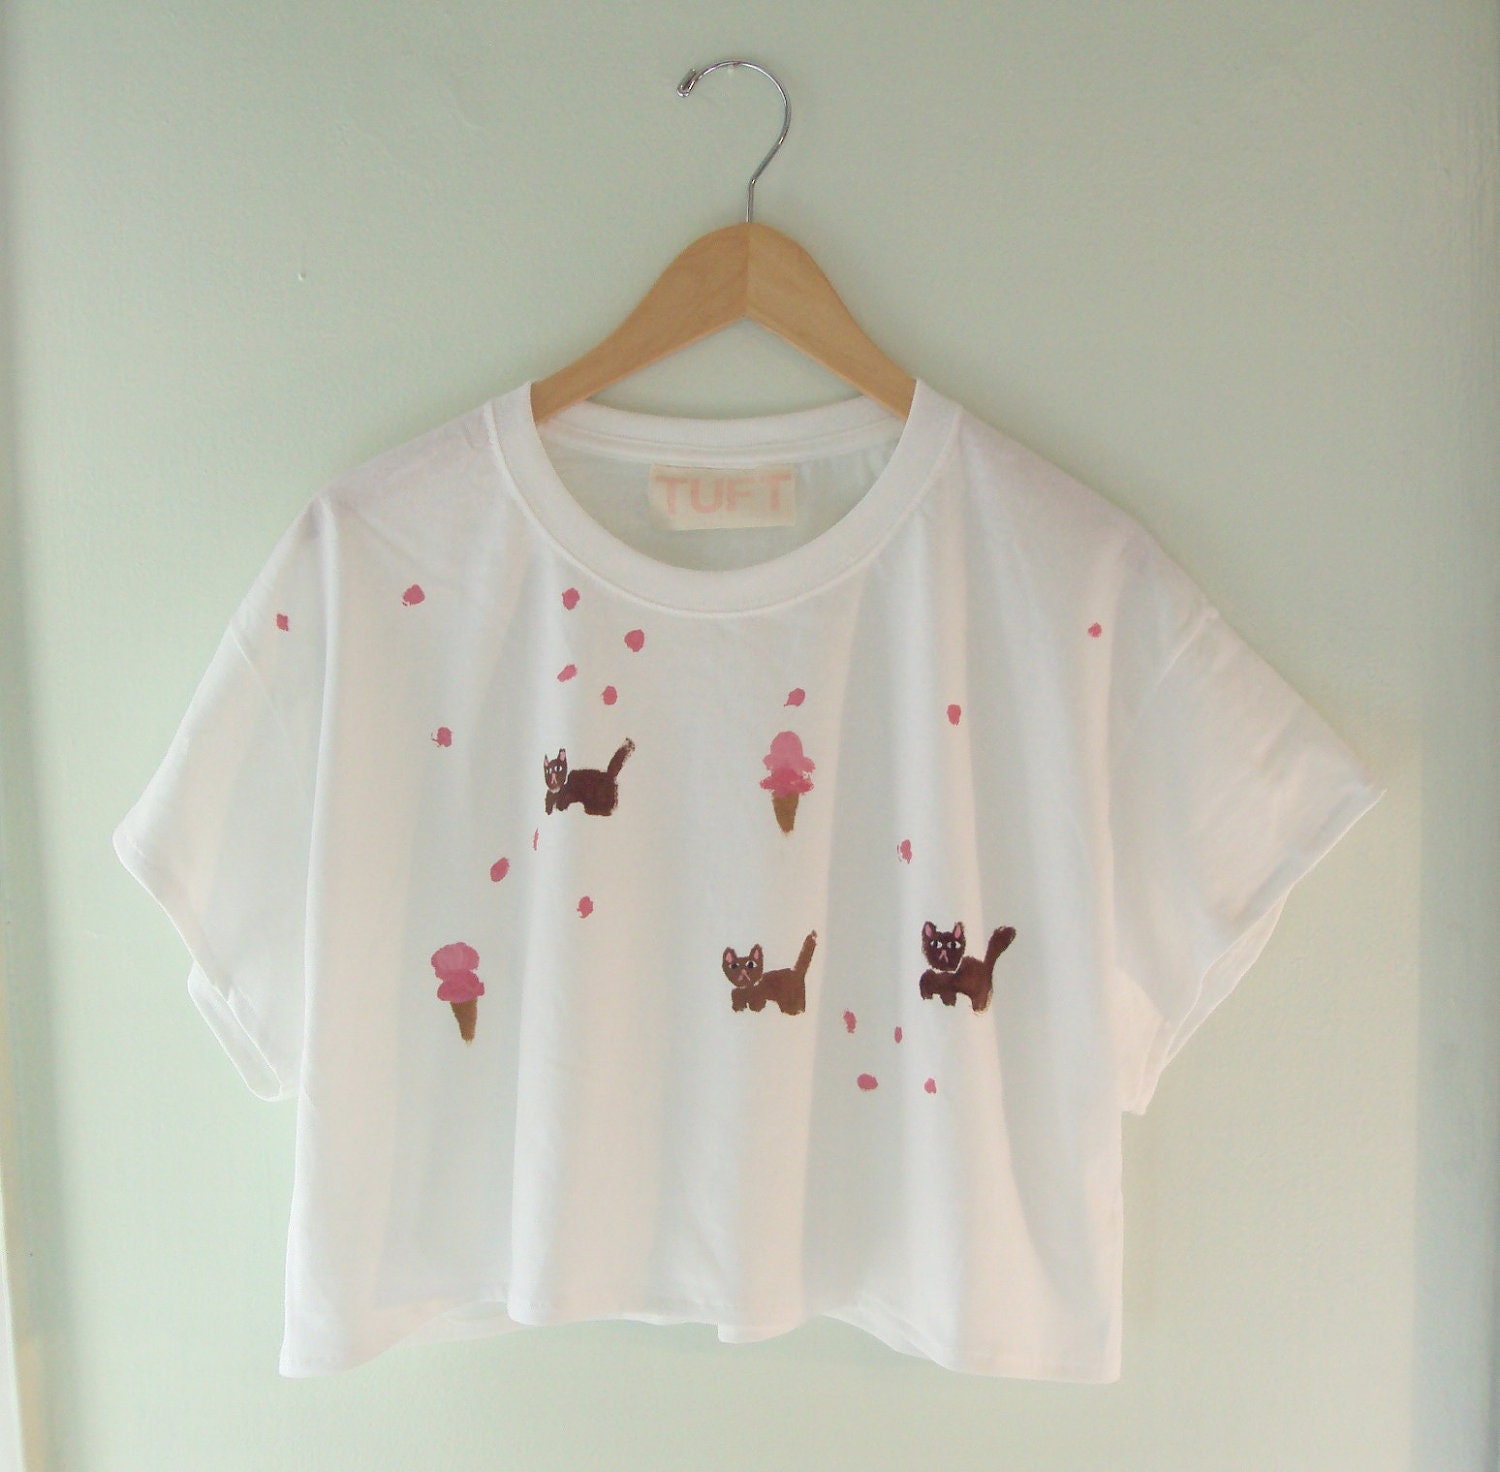 TUFT hand painted white cat crop top with pink polka dots and ice cream one size